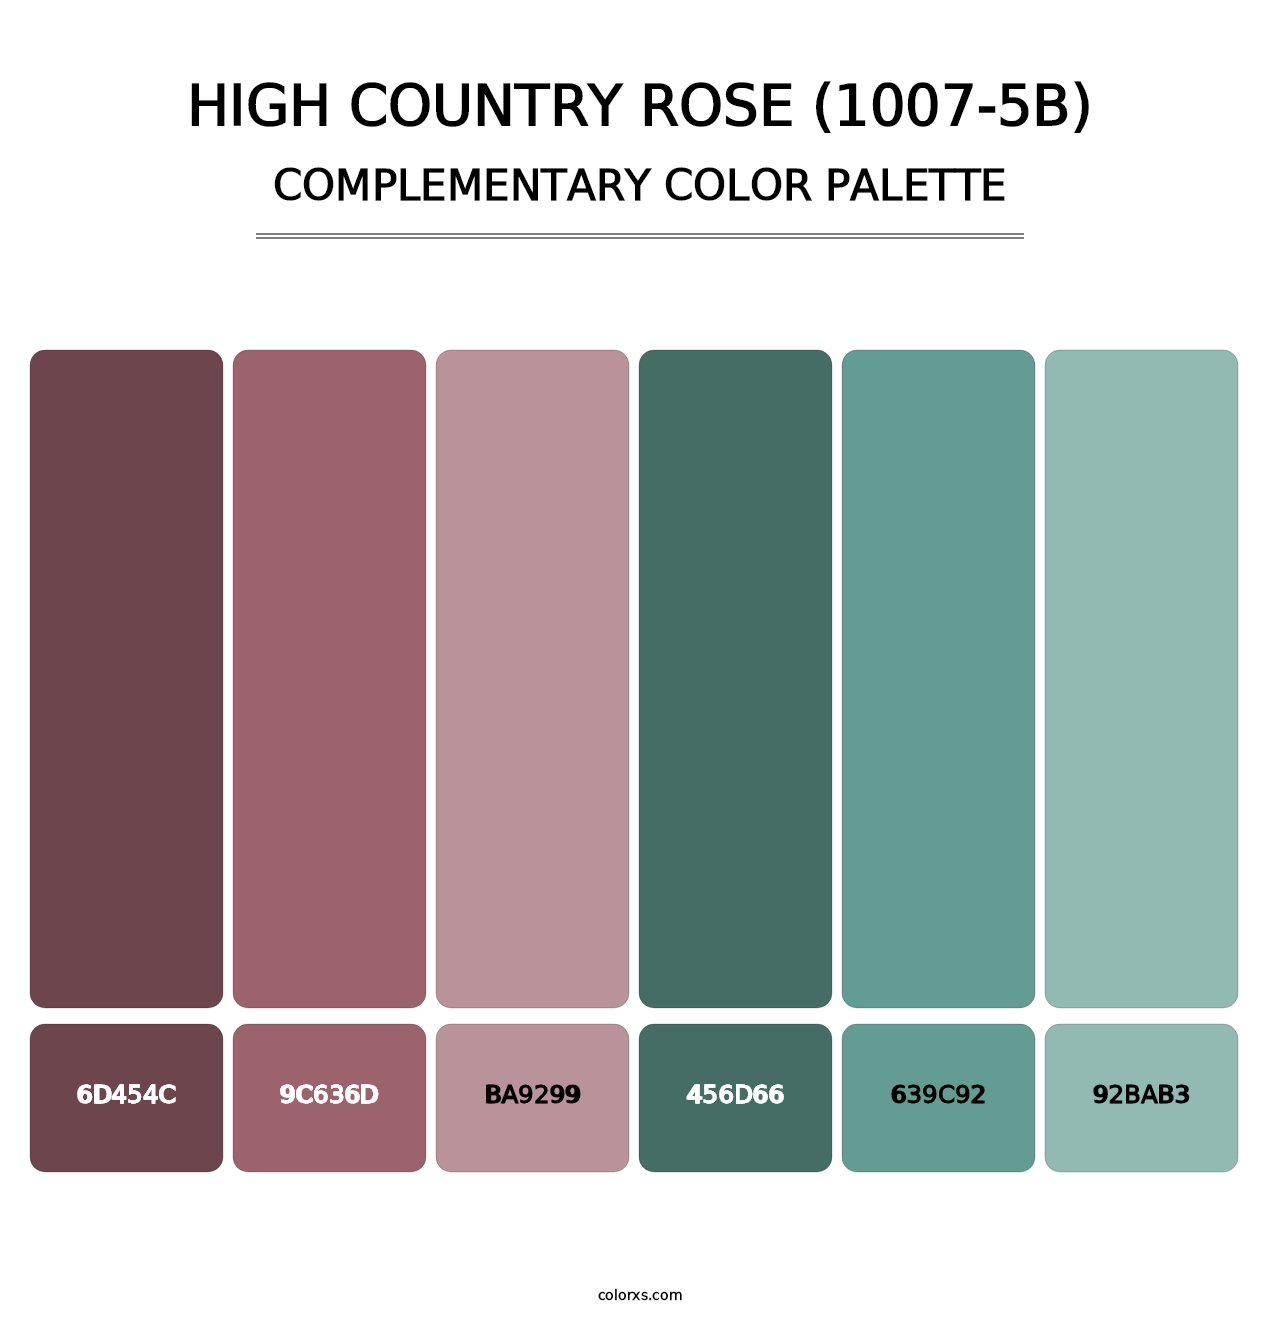 High Country Rose (1007-5B) - Complementary Color Palette